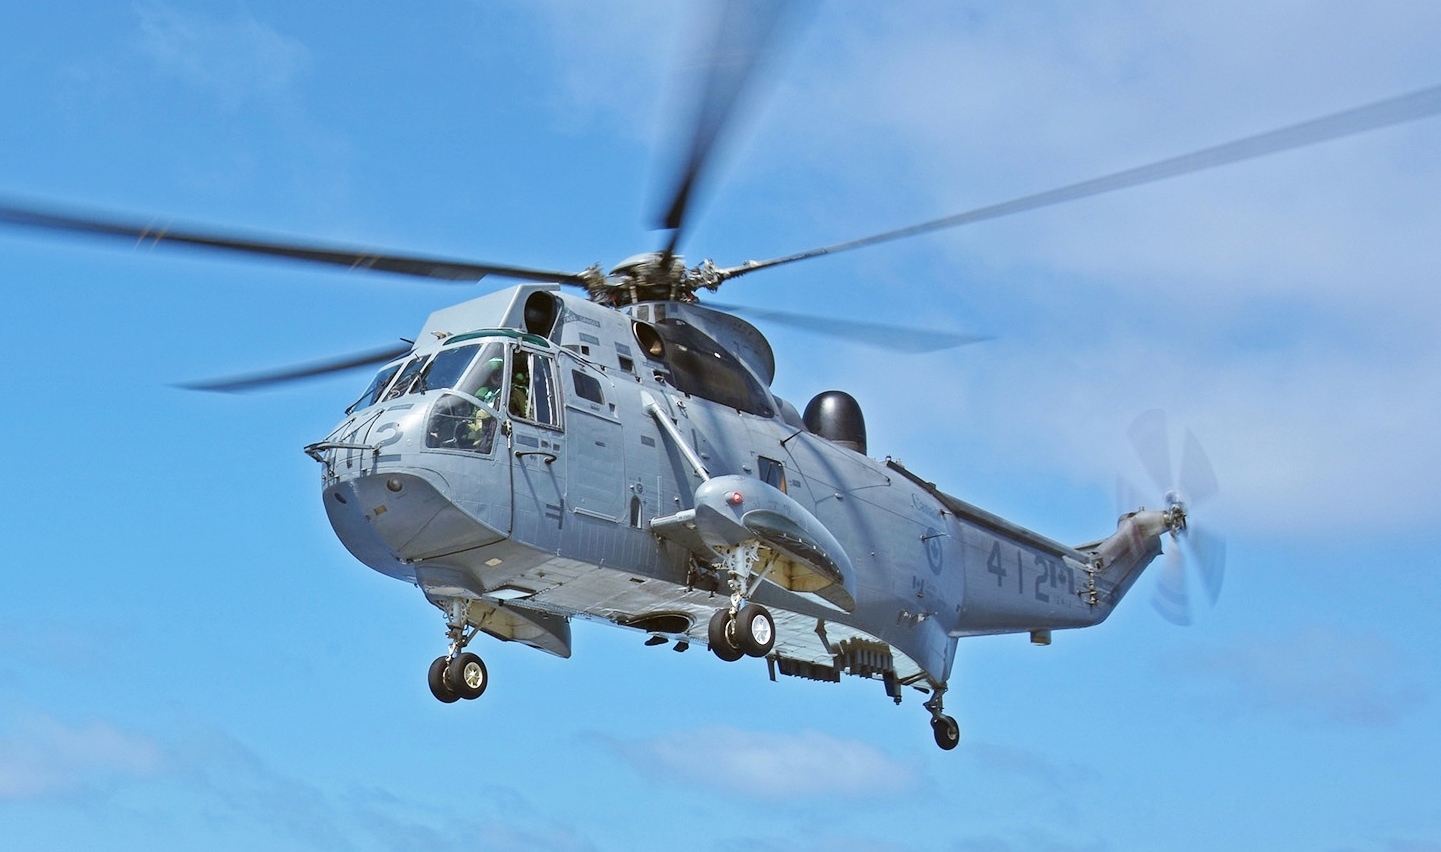 Norway will transfer spare parts for Sea King helicopters to Ukraine